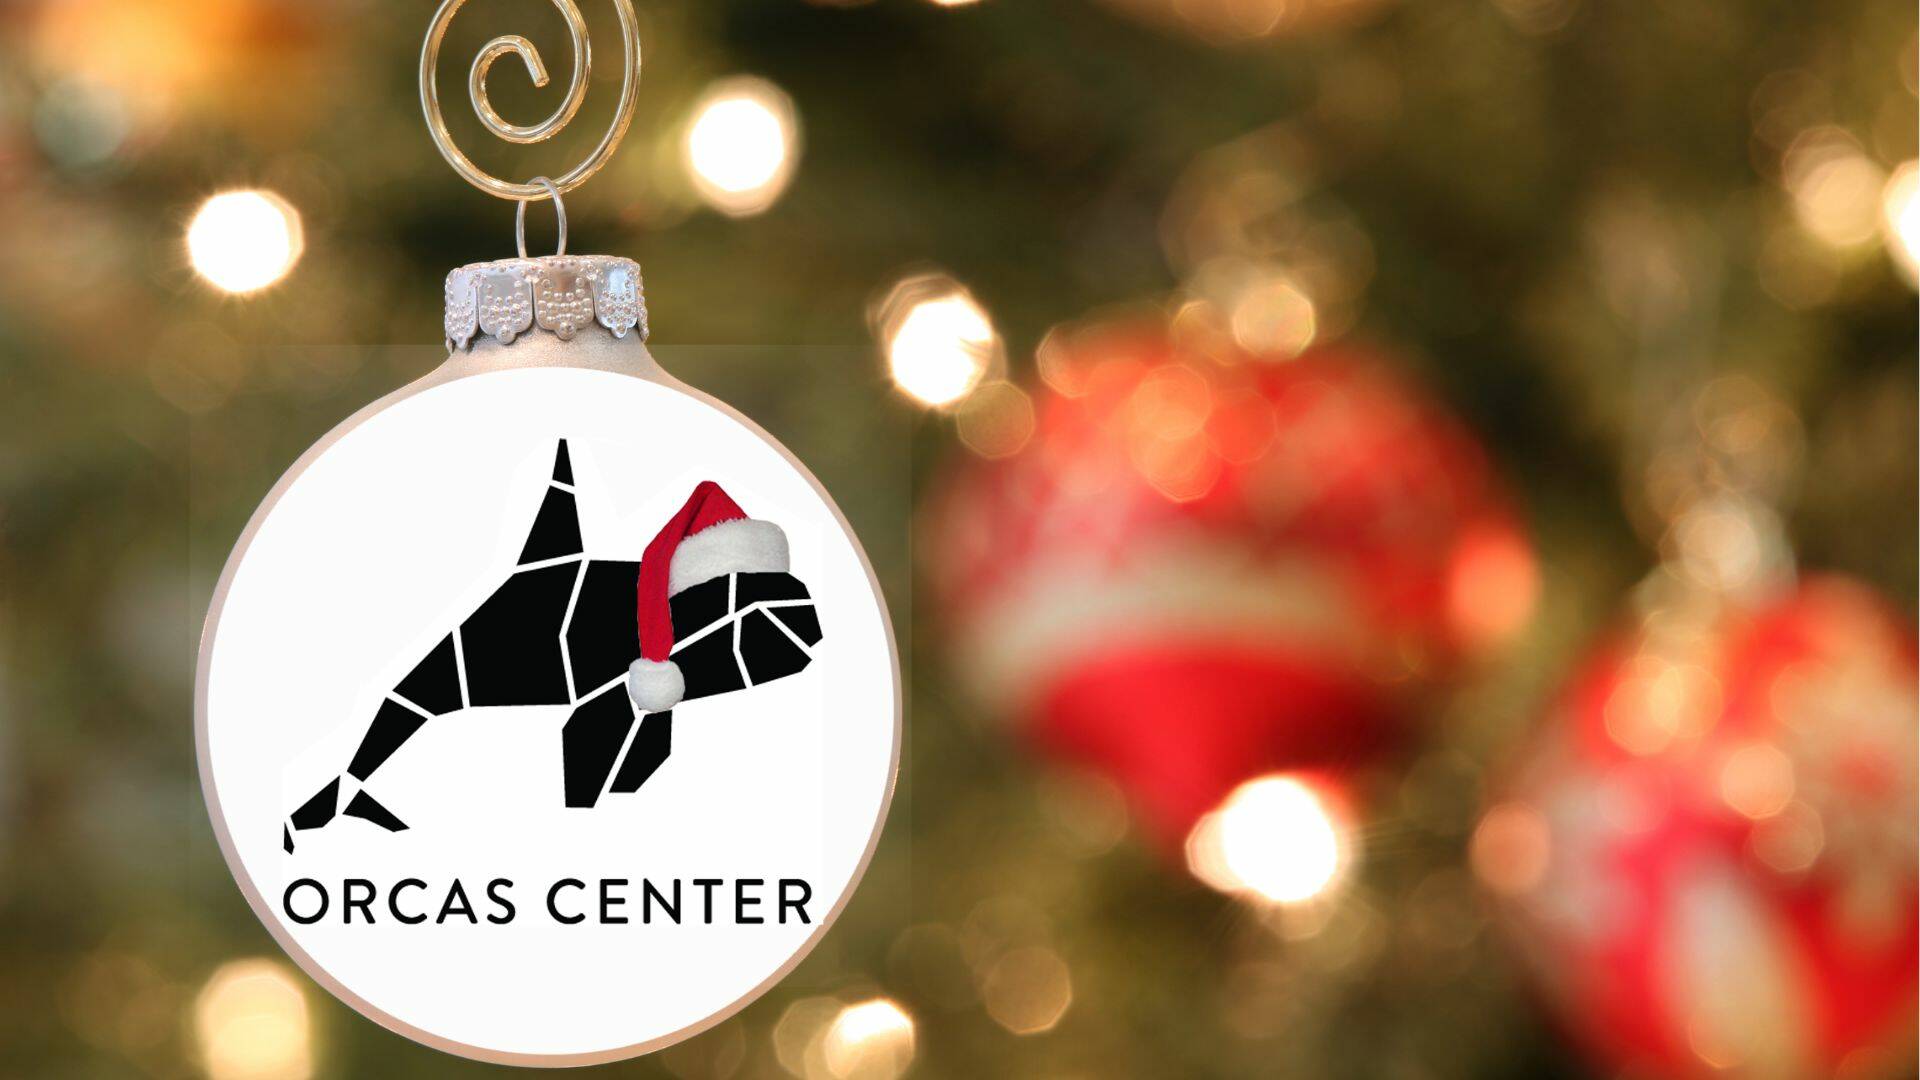 Plenty of events to help get in the holiday spirit this year at Orcas Center.